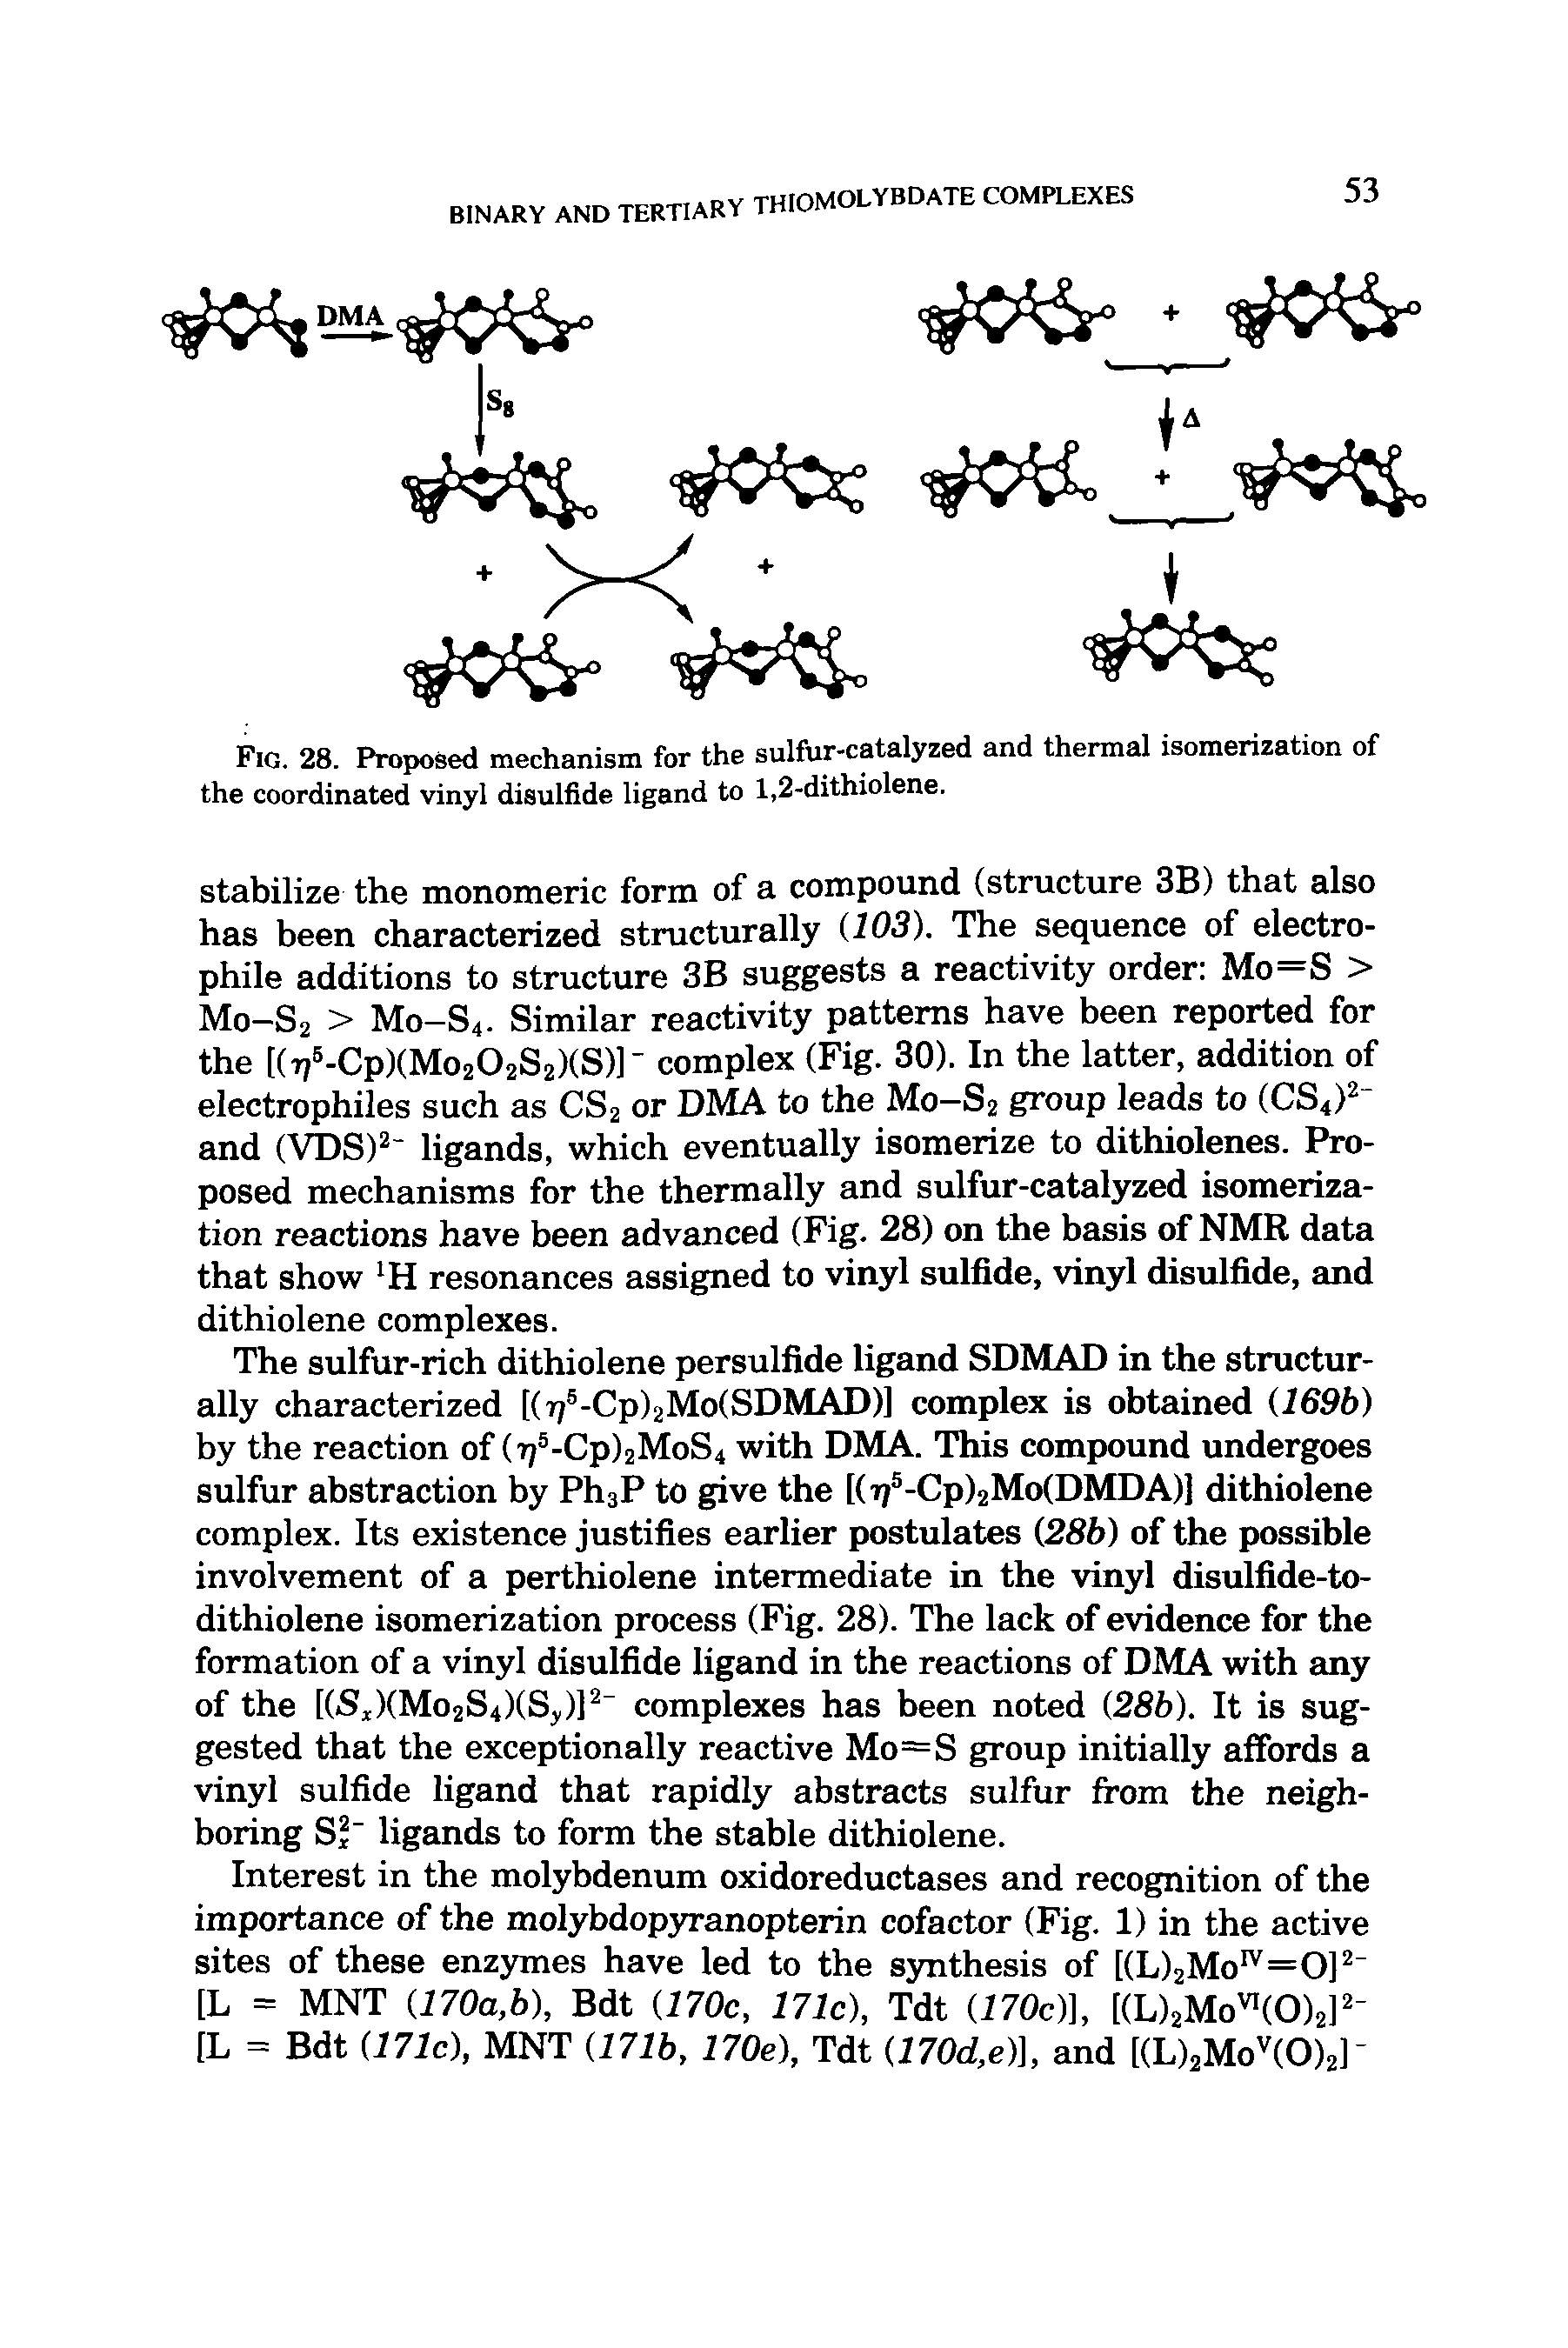 Fig. 28. Proposed mechanism for the sulfur-catalyzed and thermal isomerization of the coordinated vinyl disulfide ligand to 1,2-dithiolene.